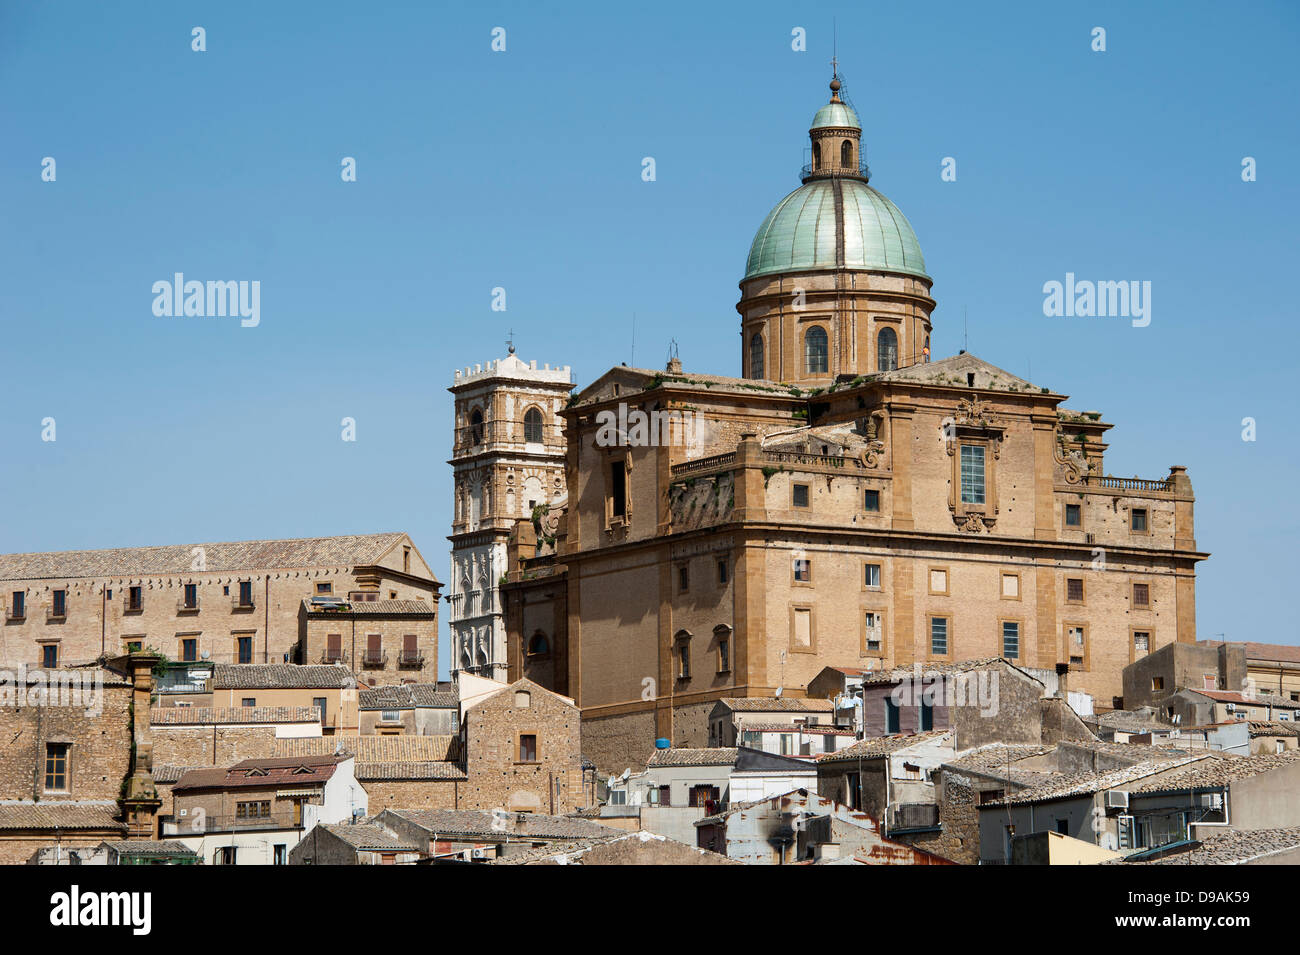 Cathedrale old town Piazza Armerina Province Enna Sicily Italy Dom Kathedrale Altstadt Piazza Armerina Provinz Enna Sizilien Ita Stock Photo